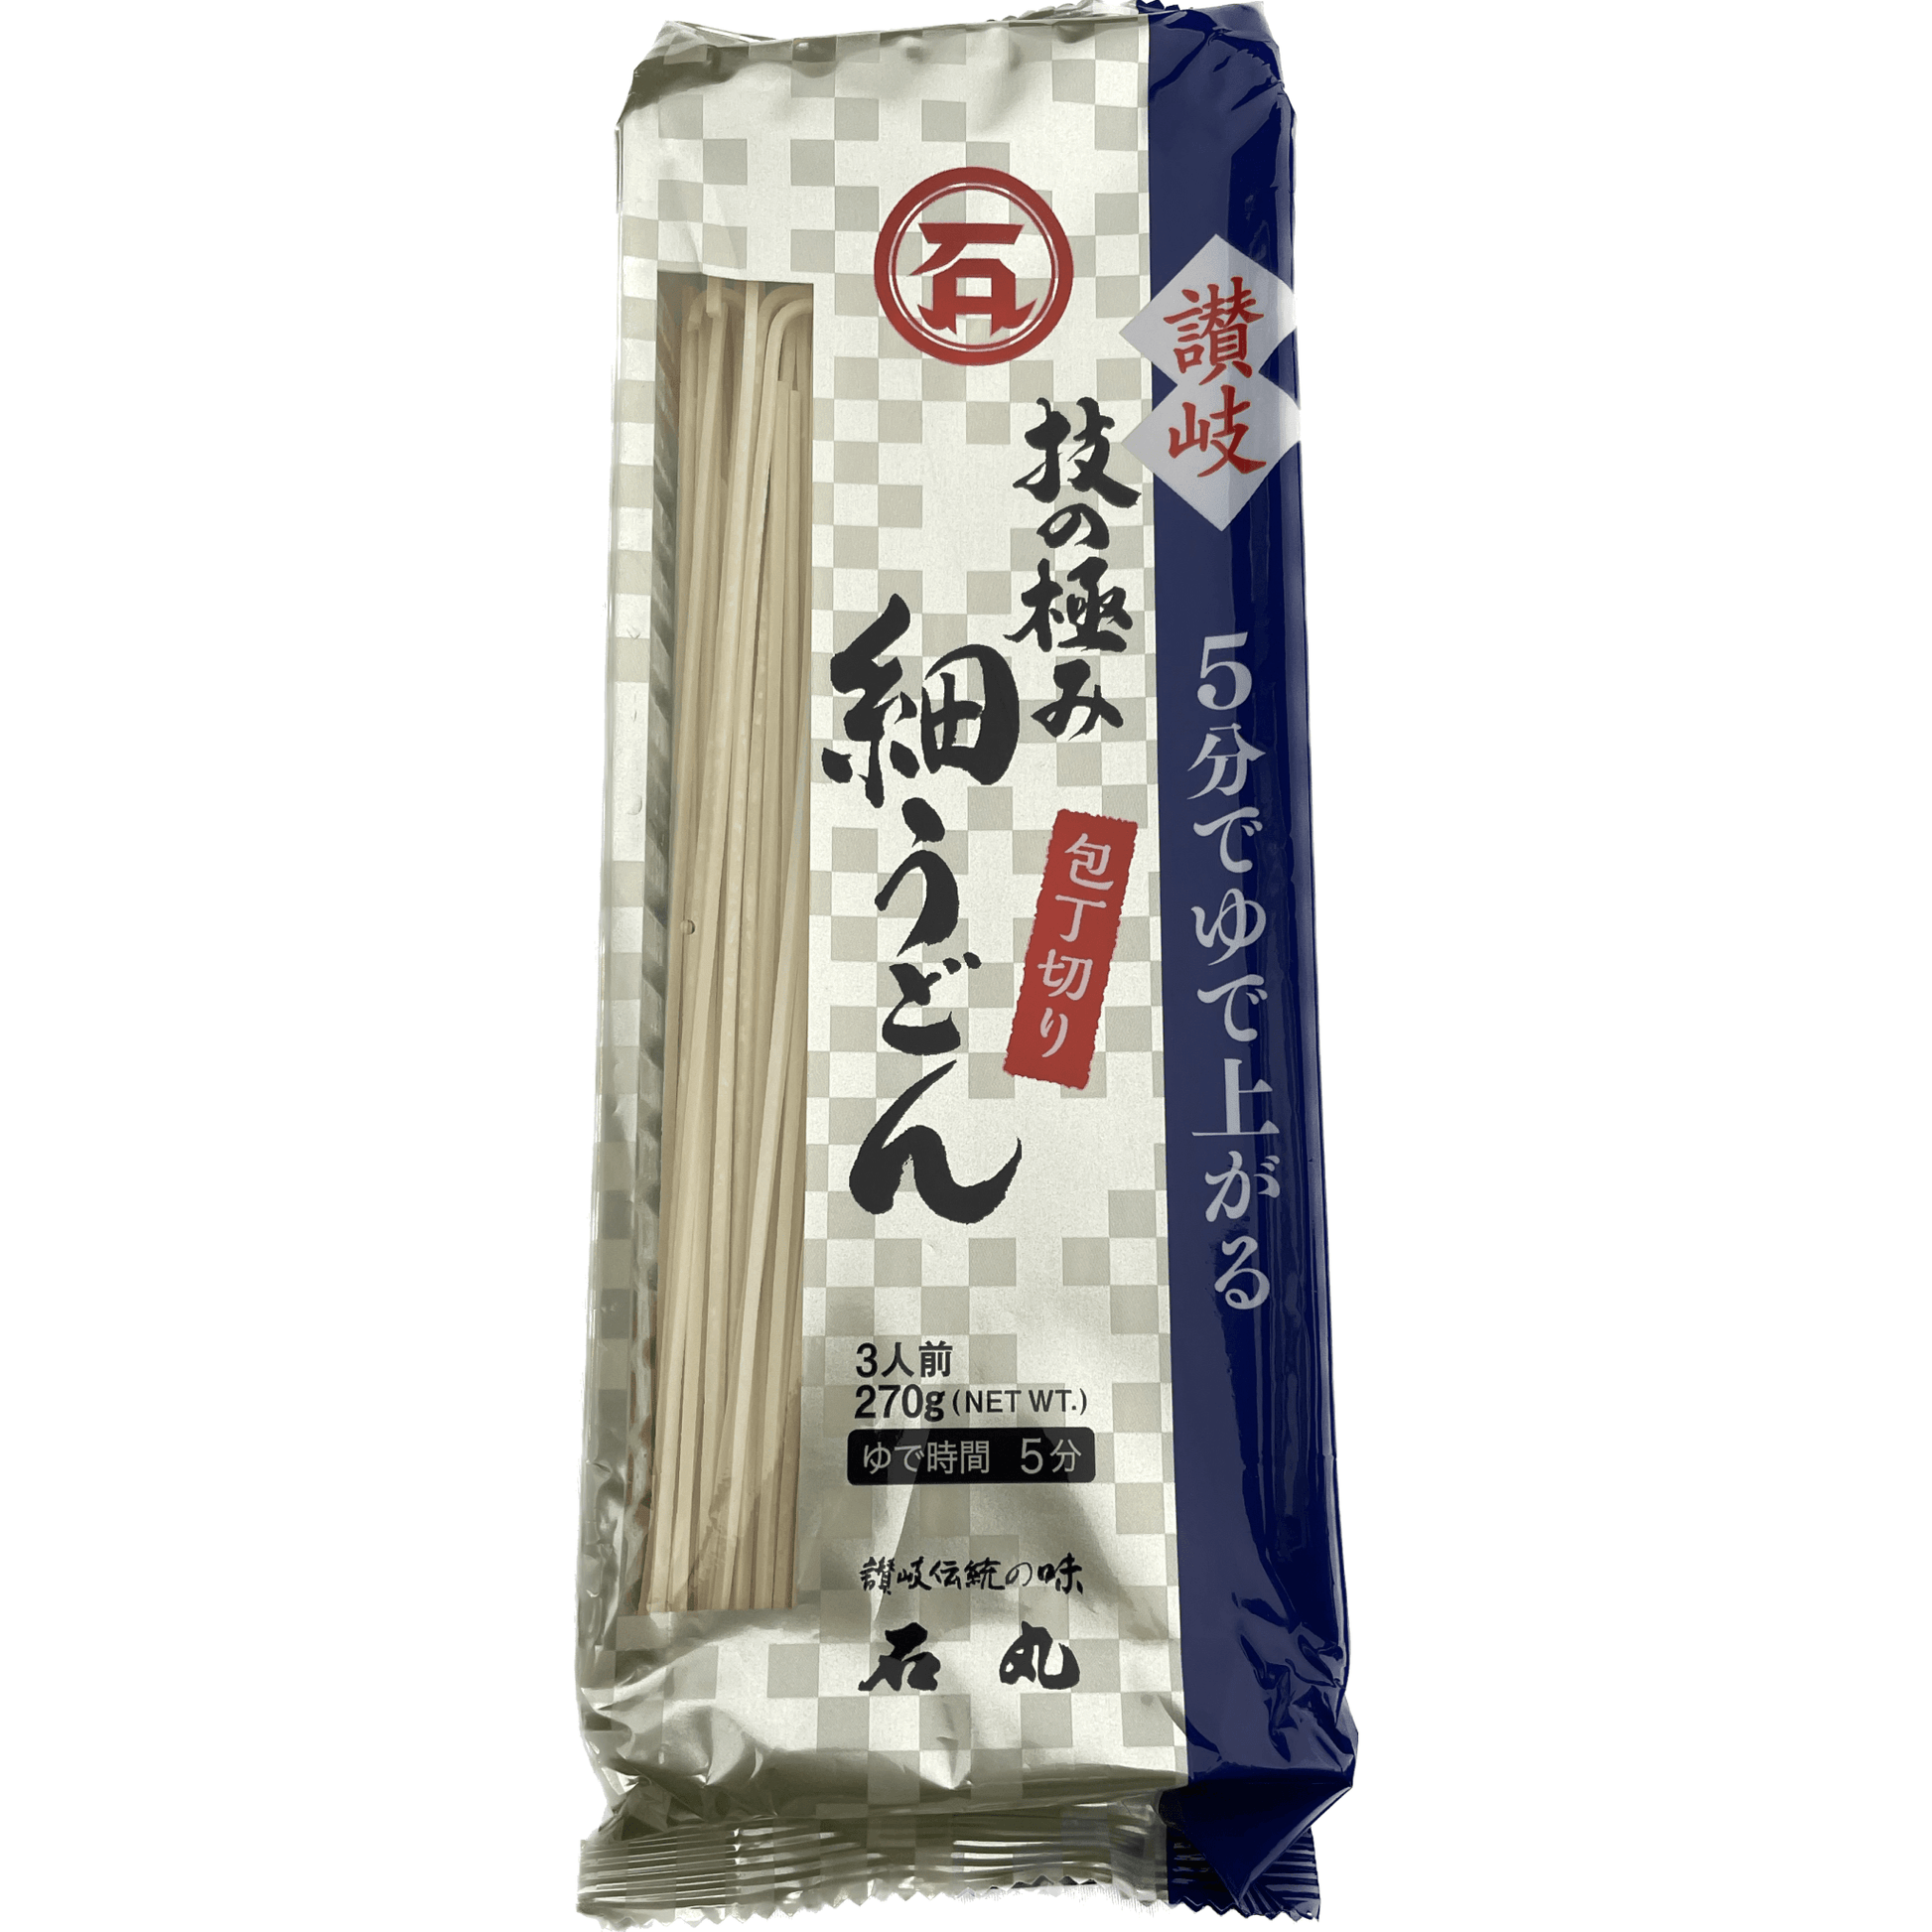 Ishimaru's Sanuki Thin Udon Noodles Cut with a Knife 石丸　技の極み　讃岐細うどん　包丁切り　270g - RiceWineShop